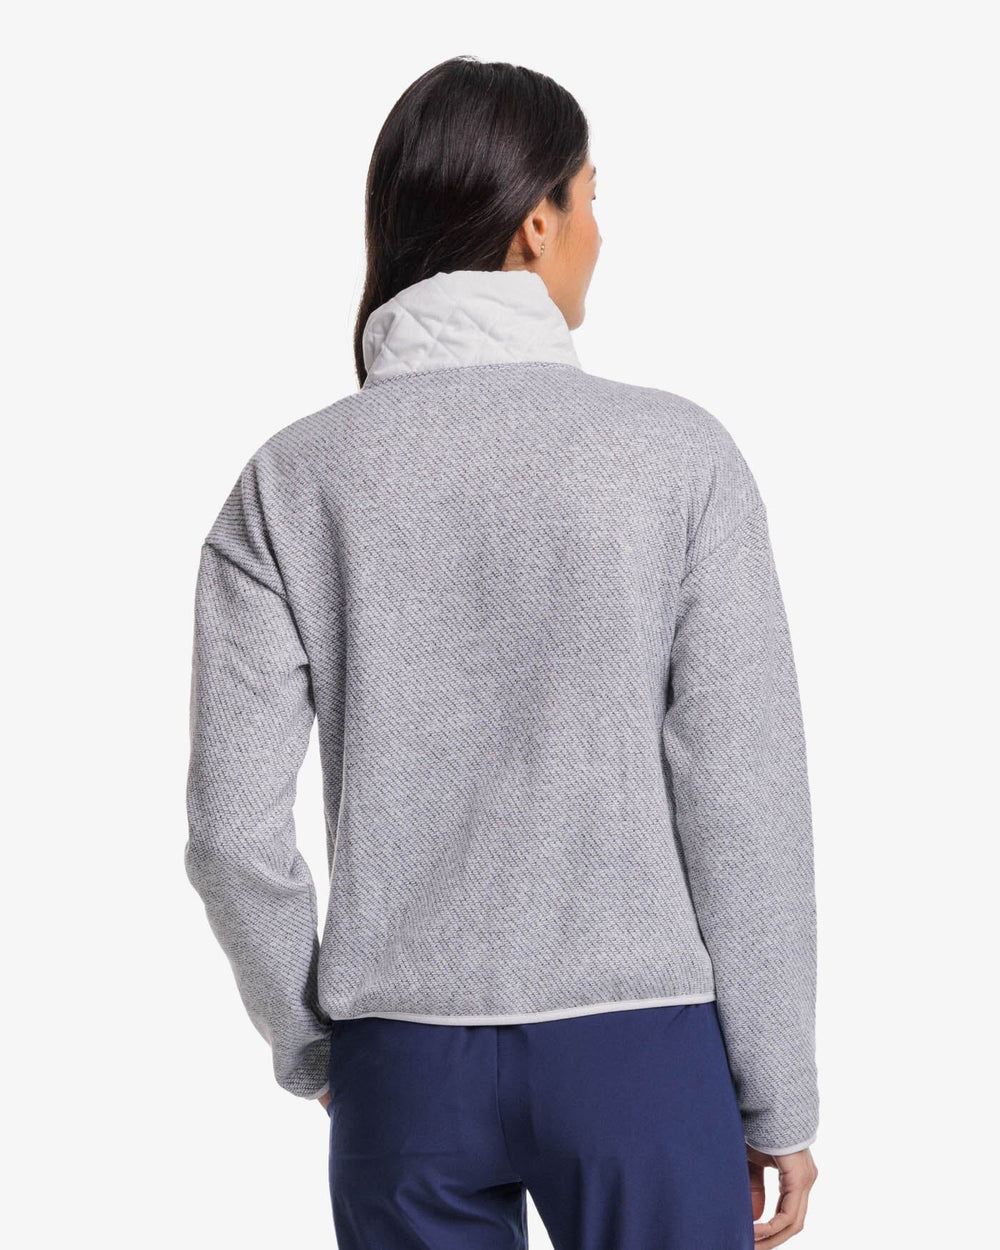 The back view of the Southern Tide Gracen Heather Mixed Media Jacket by Southern Tide - Heather Star White